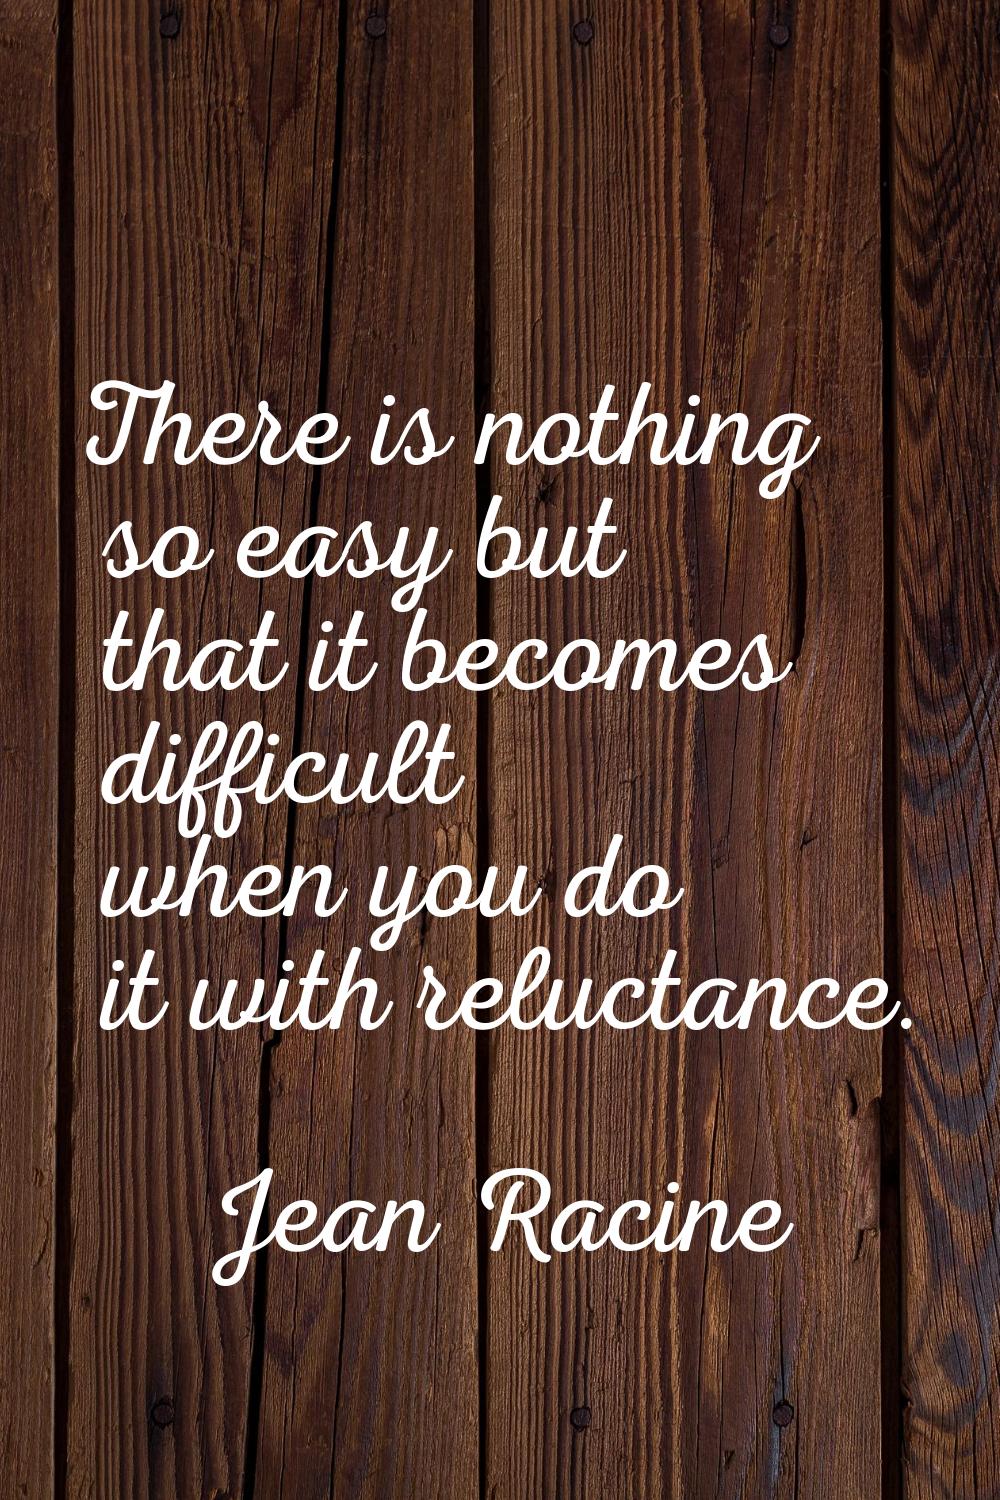 There is nothing so easy but that it becomes difficult when you do it with reluctance.